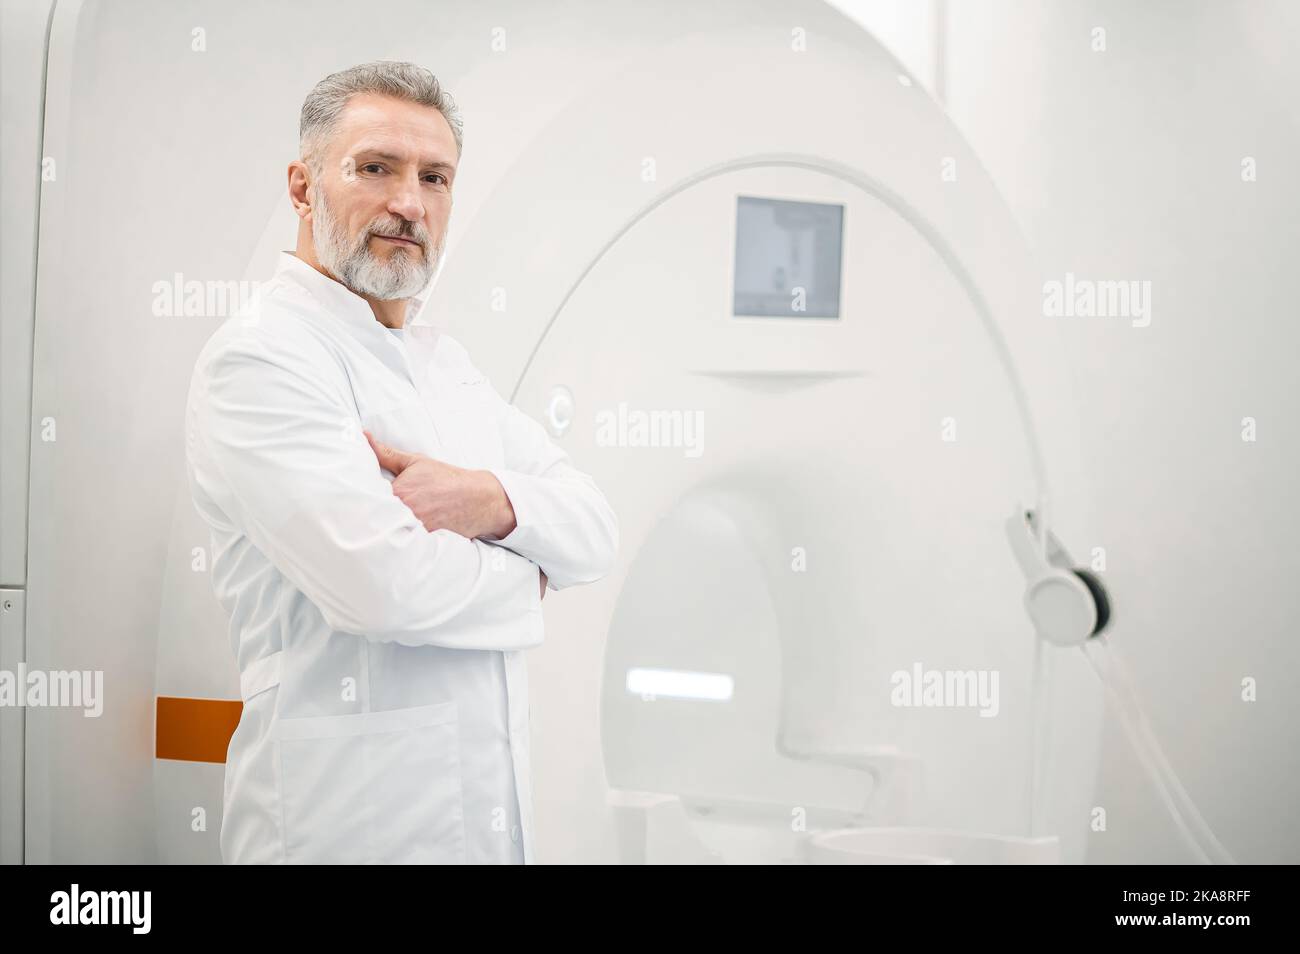 Male gray-haired doctor in a lab coat Stock Photo